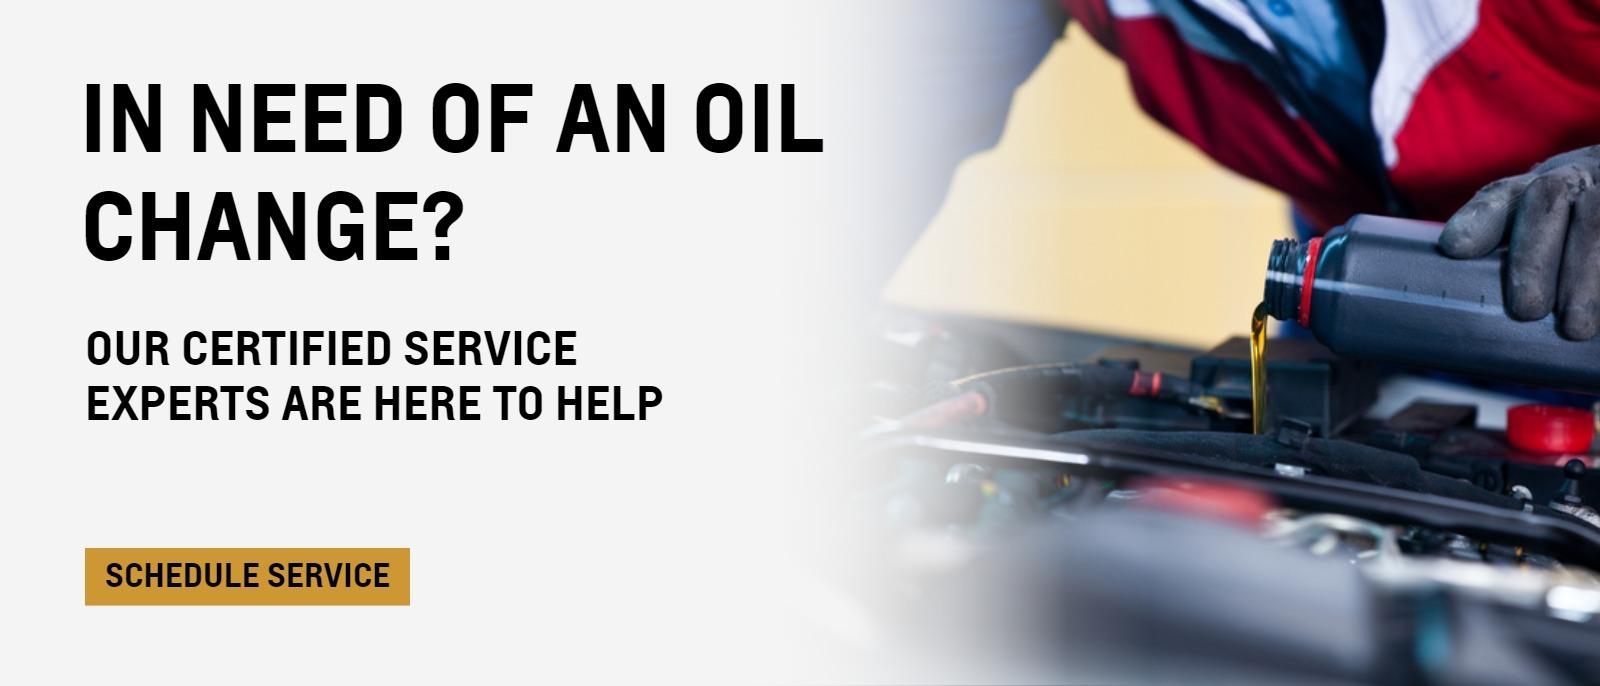 IN NEED OF AN OIL CHANGE?
Our Certified Service Experts are here to help